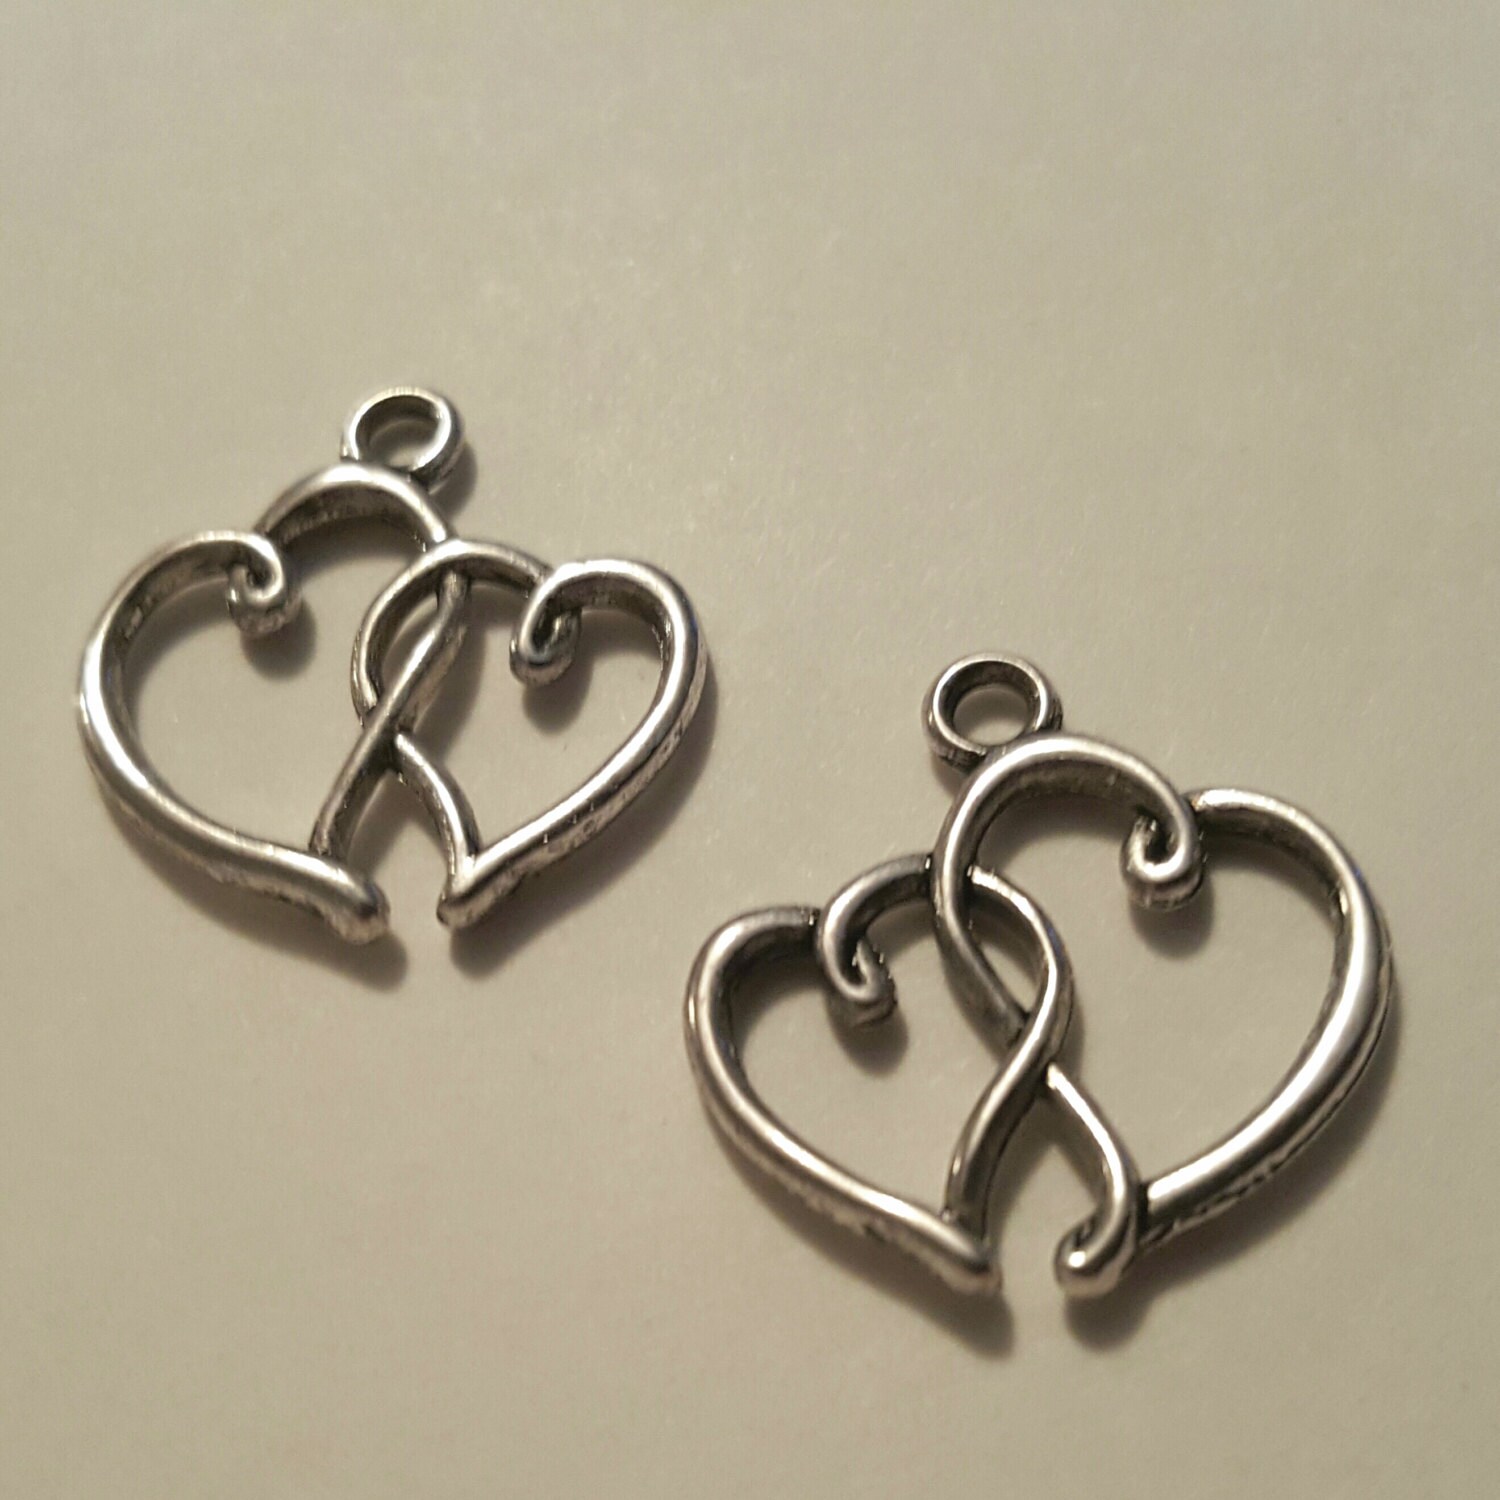 Double Linked Heart Charms Favor Invitation Decoration Silver 100 Pieces 